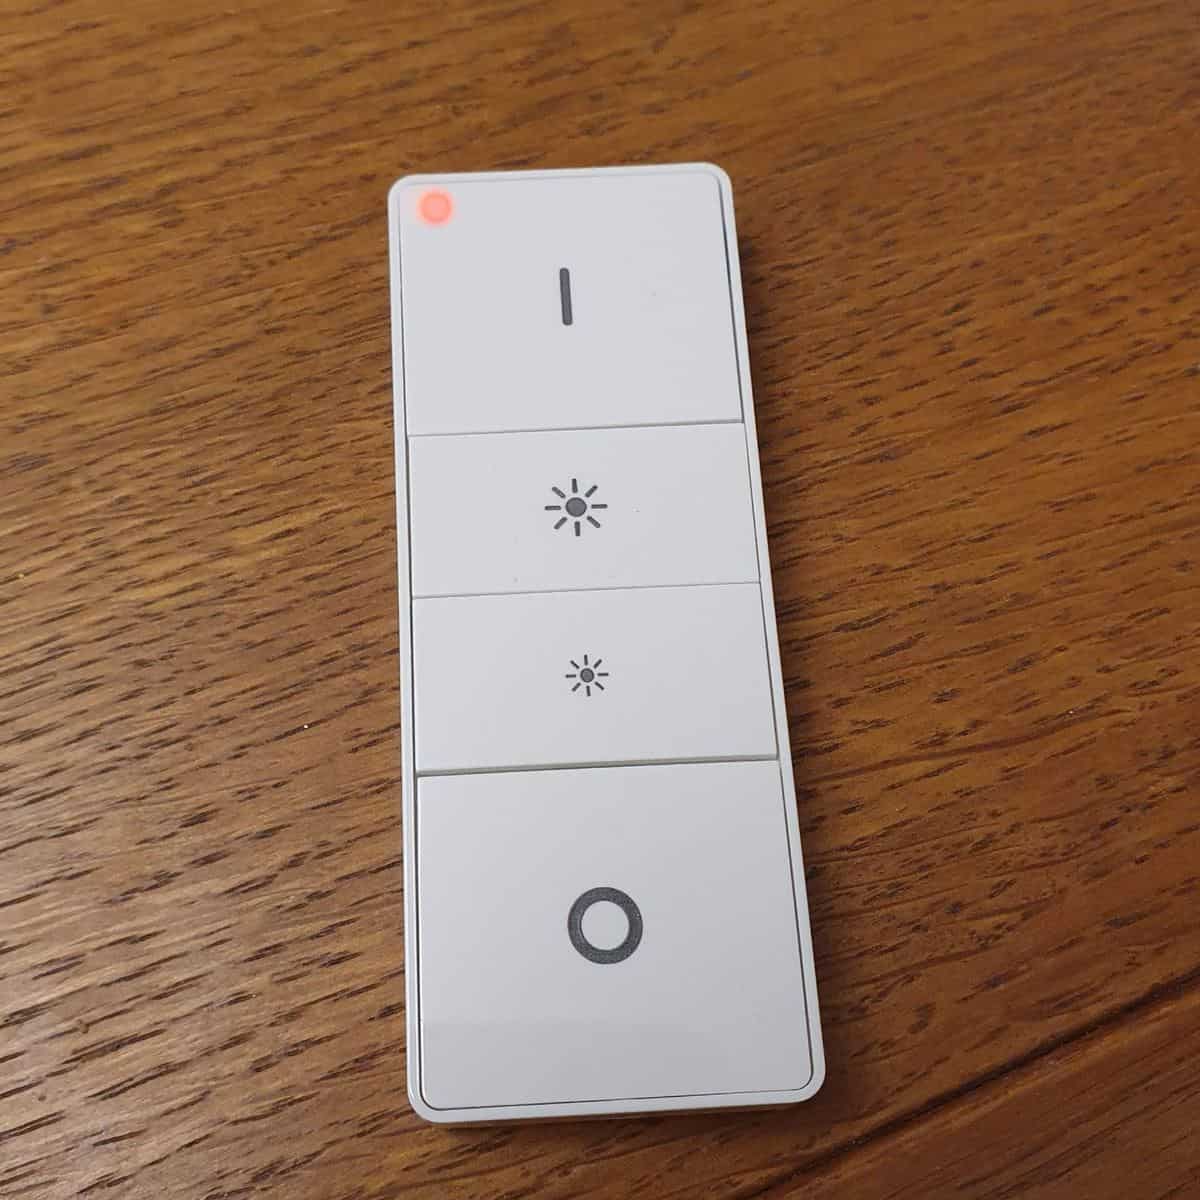 løn affældige Peck How To Fix The Red Light On A Philips Hue Dimmer Switch (9 Solutions) -  Smart Home Point